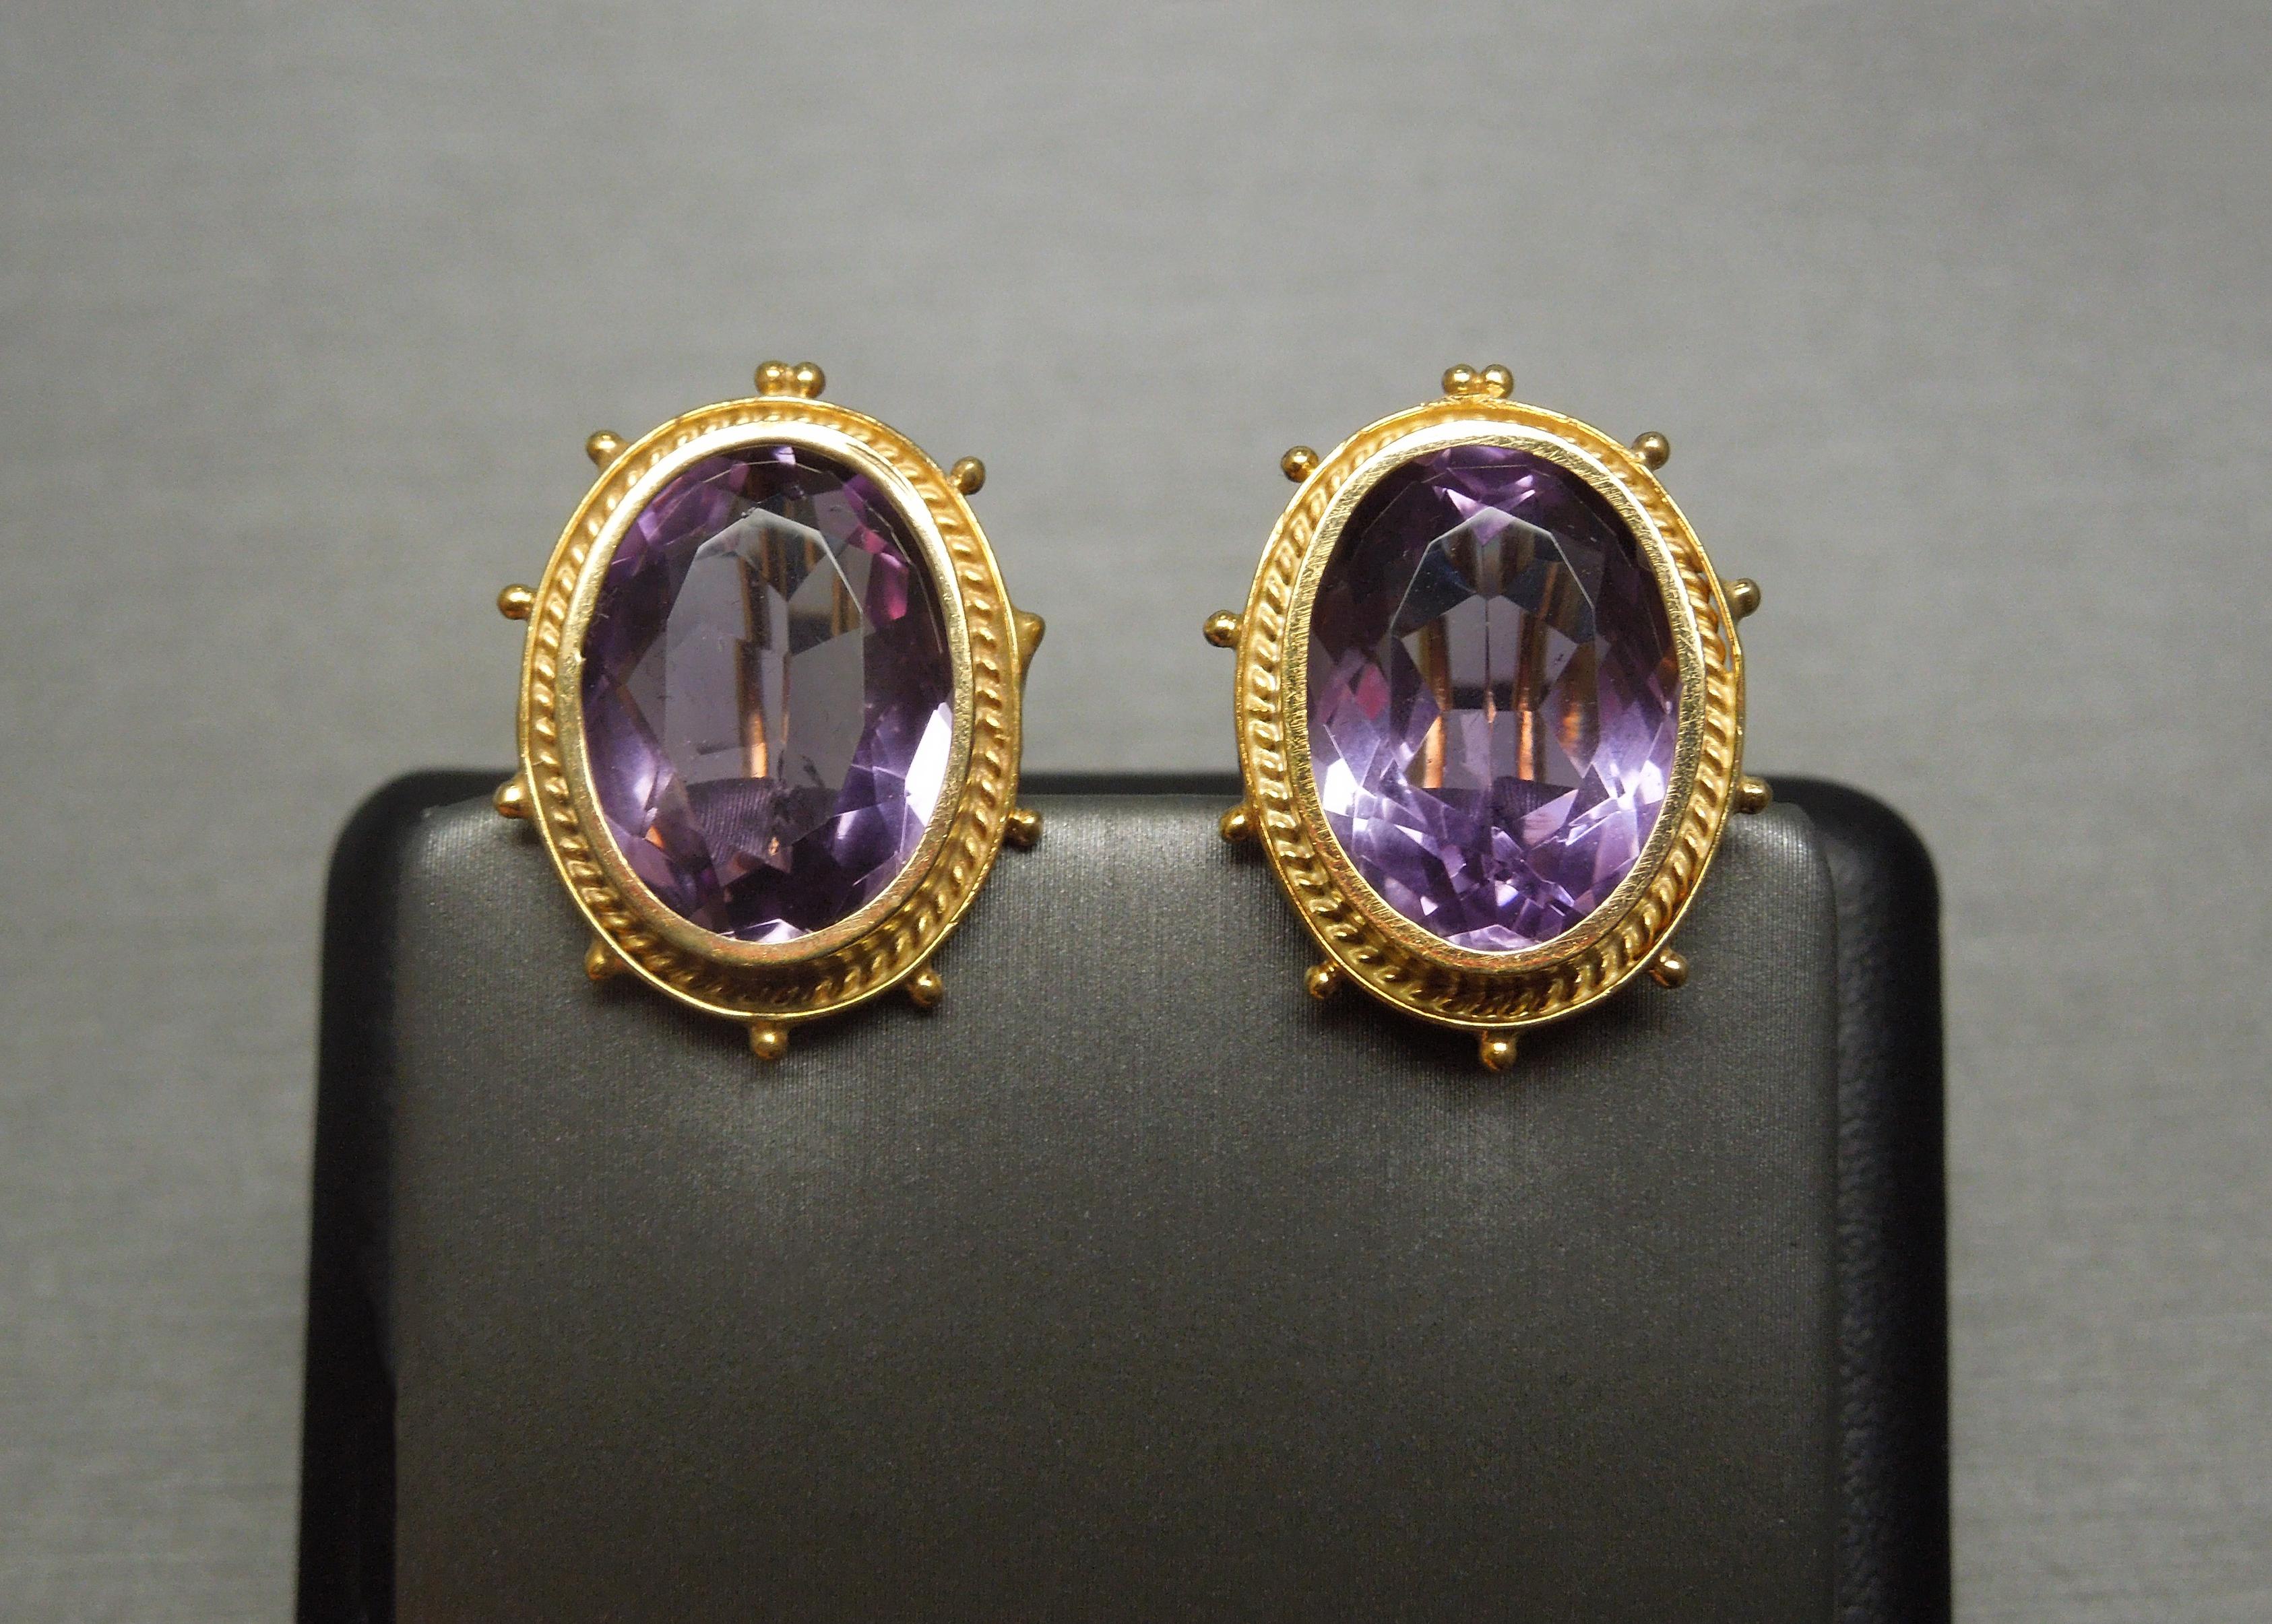 Antique Victorian Circa 1890
in an Etruscan / Revival Inspired design

Constructed completely of 14 Karat Yellow Gold

Each containing 1 Bezel set Genuine Earth-Mined Faceted Oval cut Natural Intense Purple Amethyst
totaling approximately 30.00